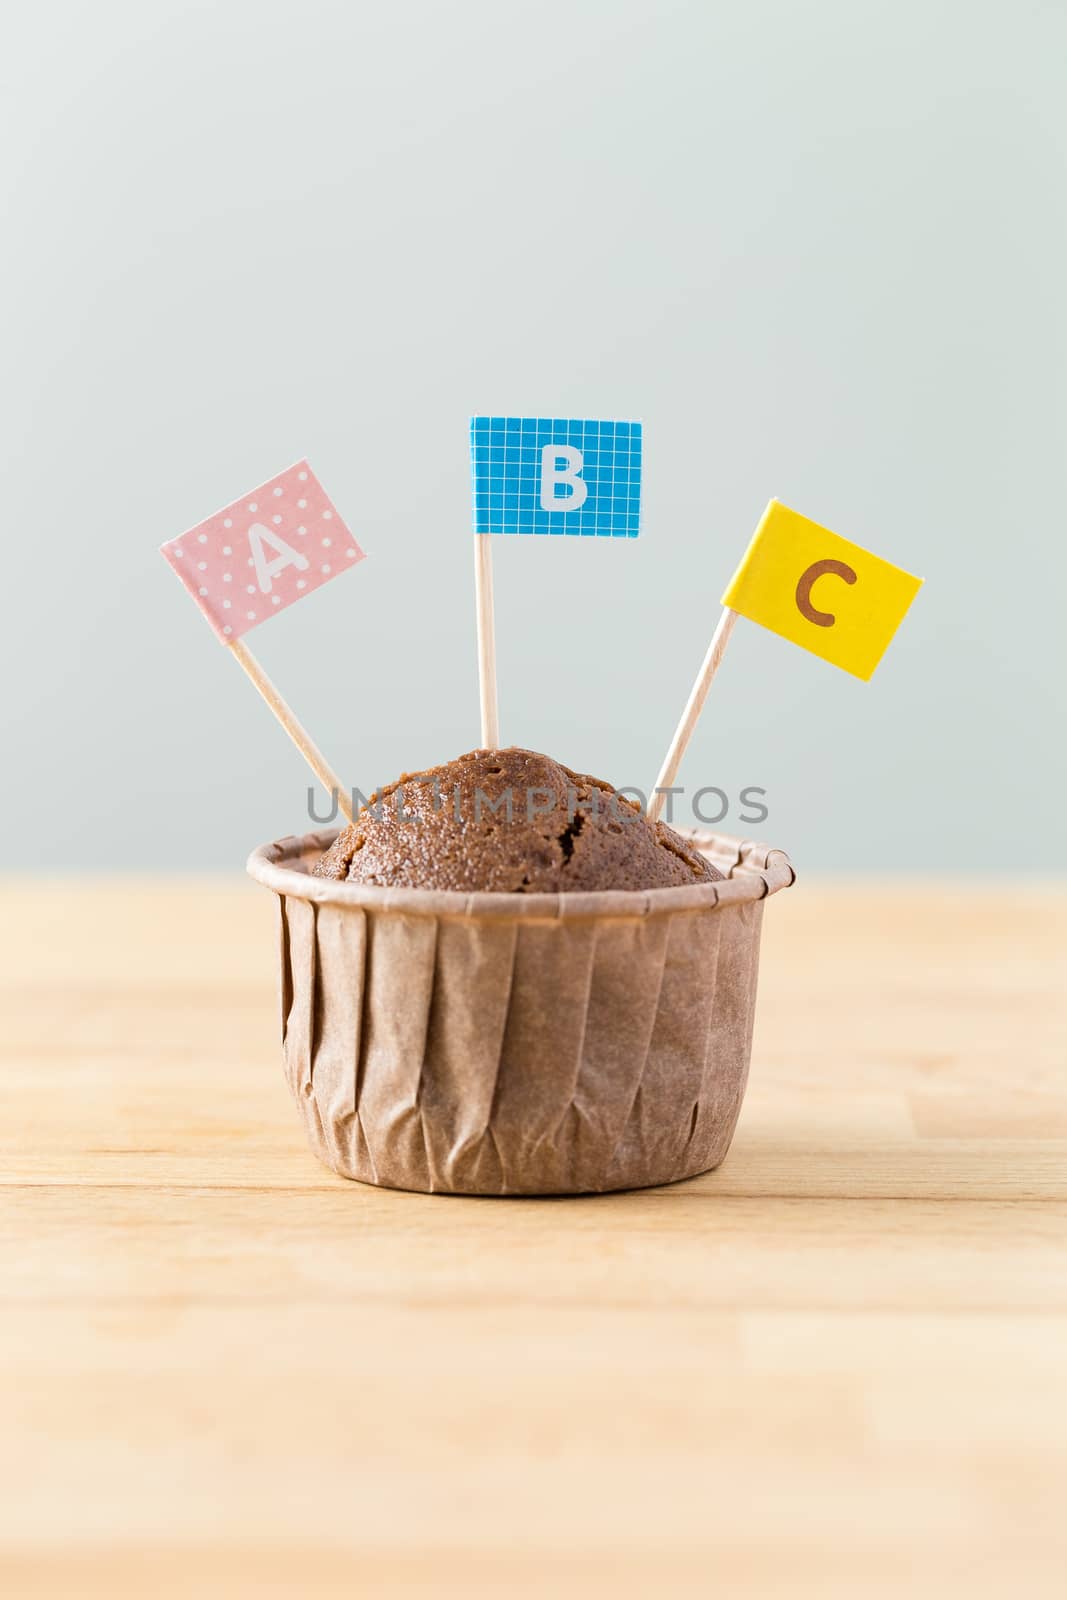 Chocolate muffins with small flag of word ABC